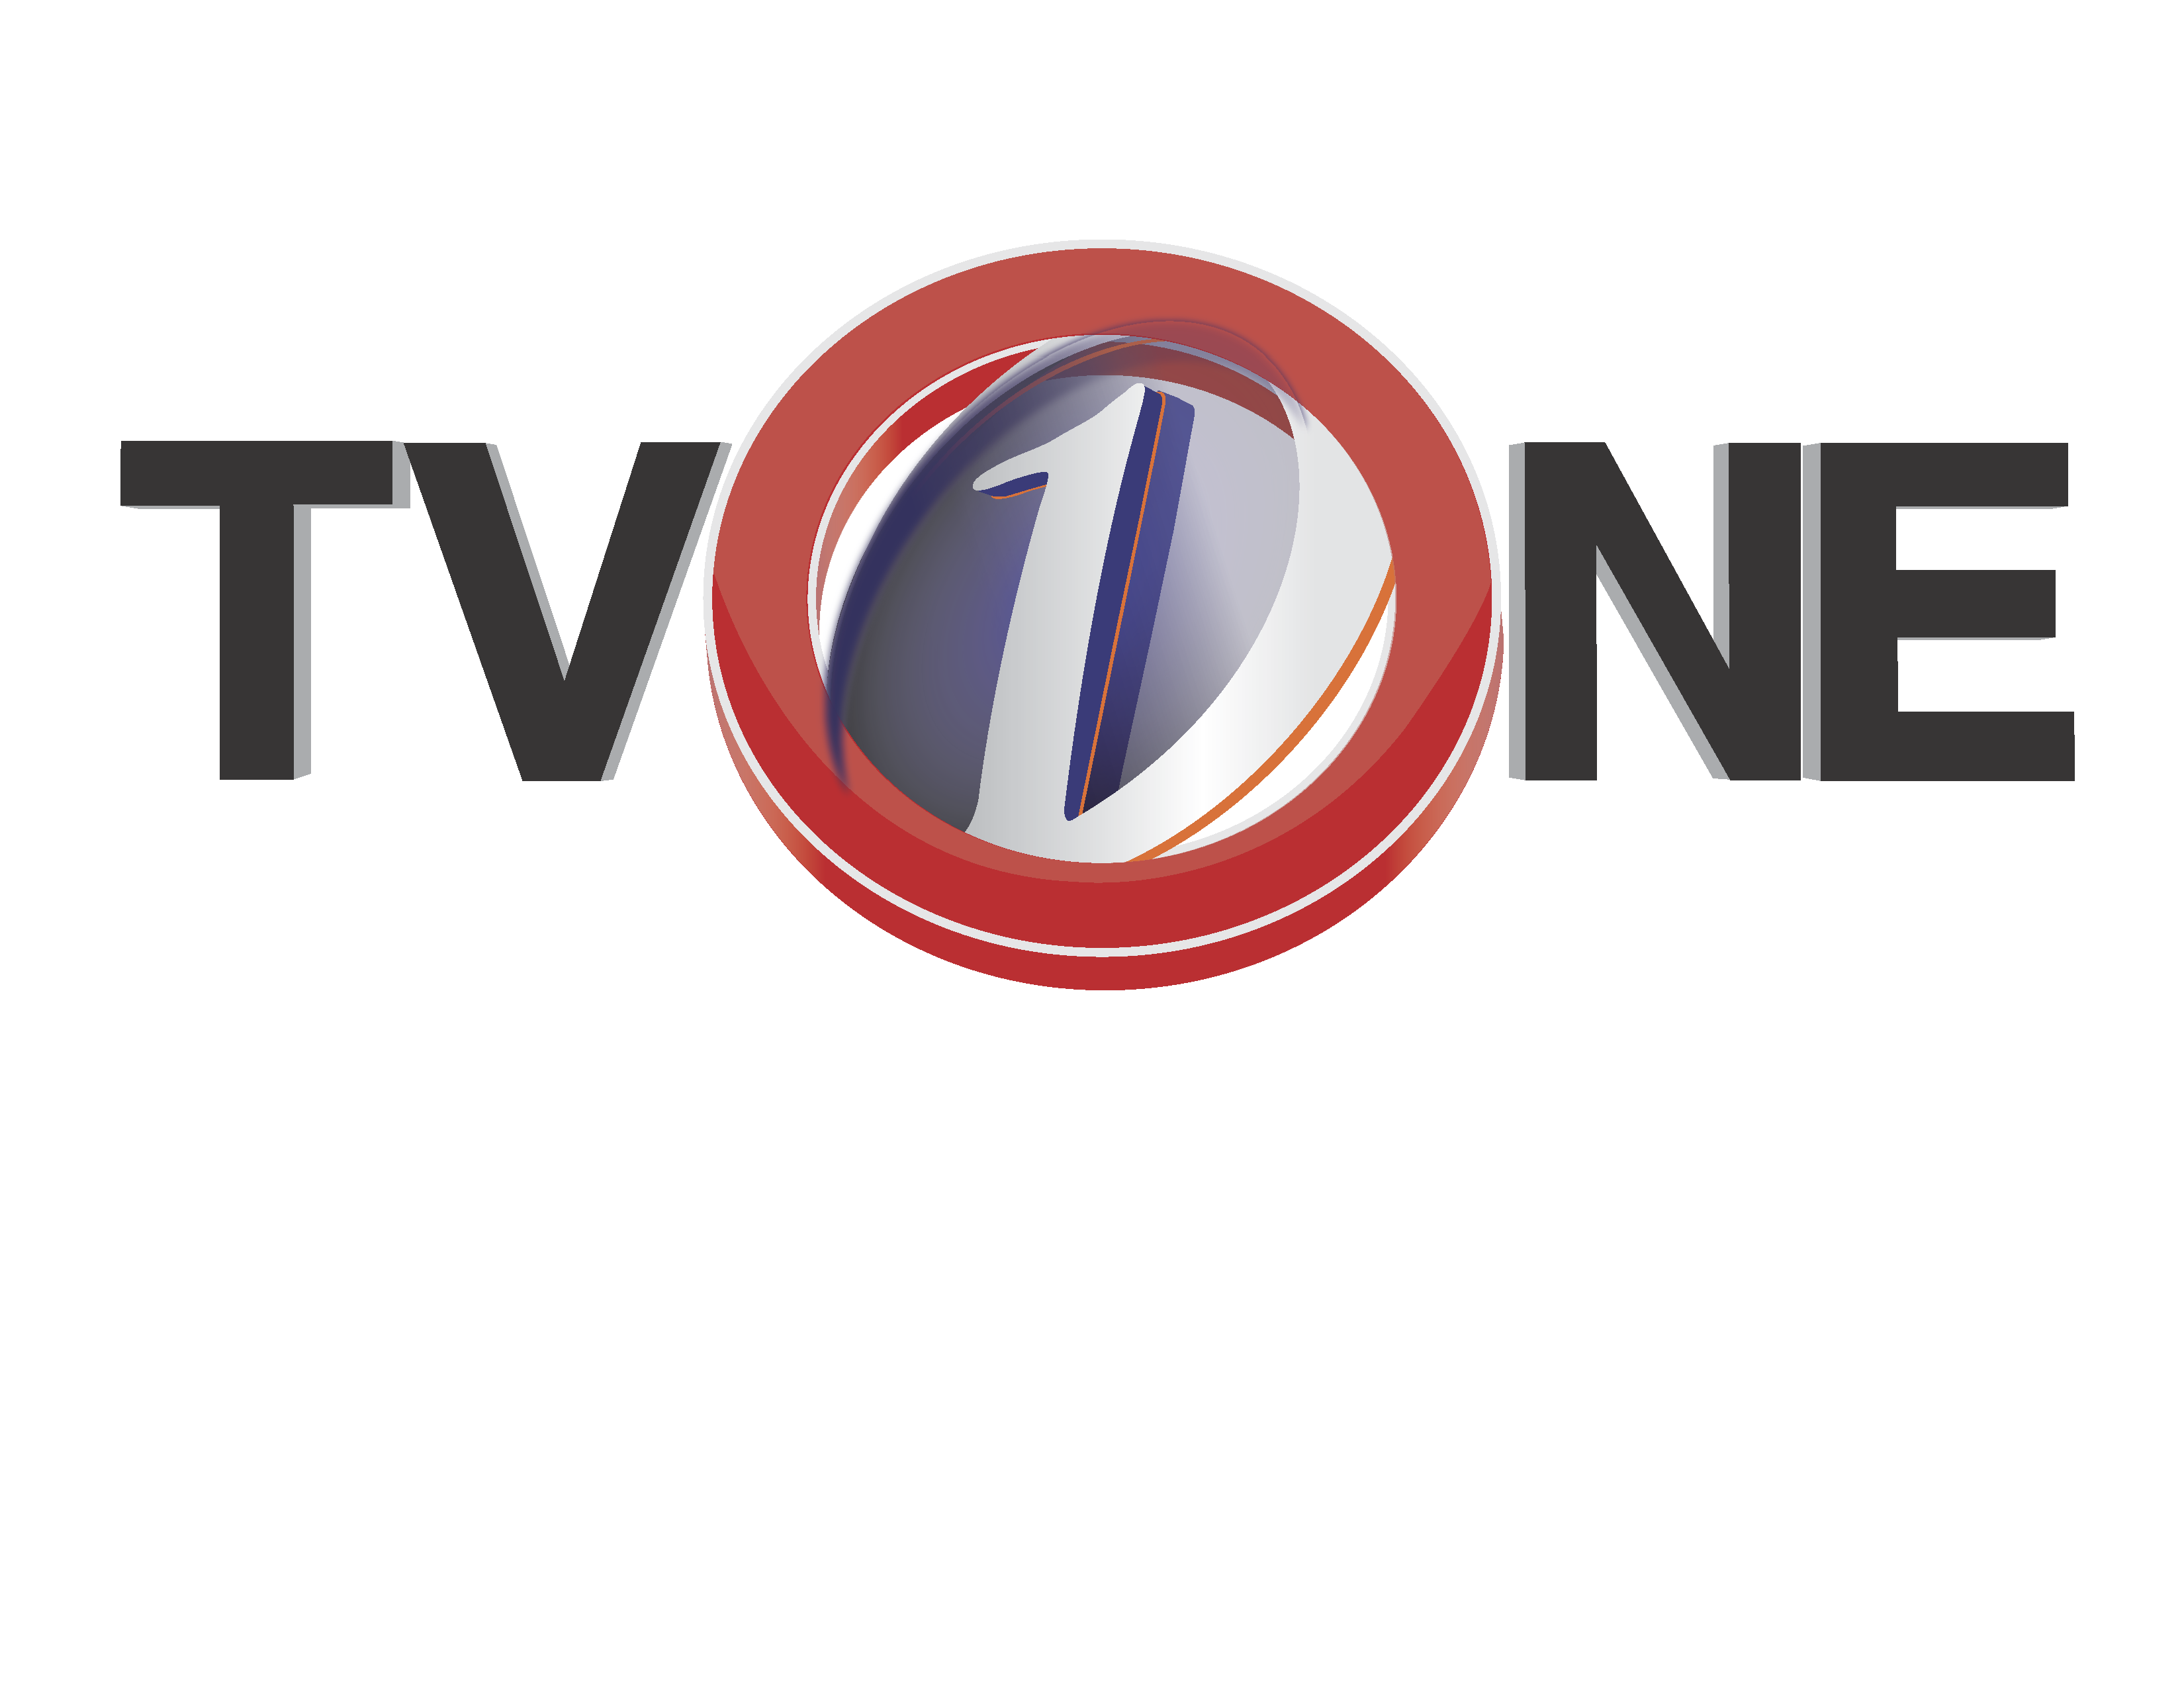 Tv One 